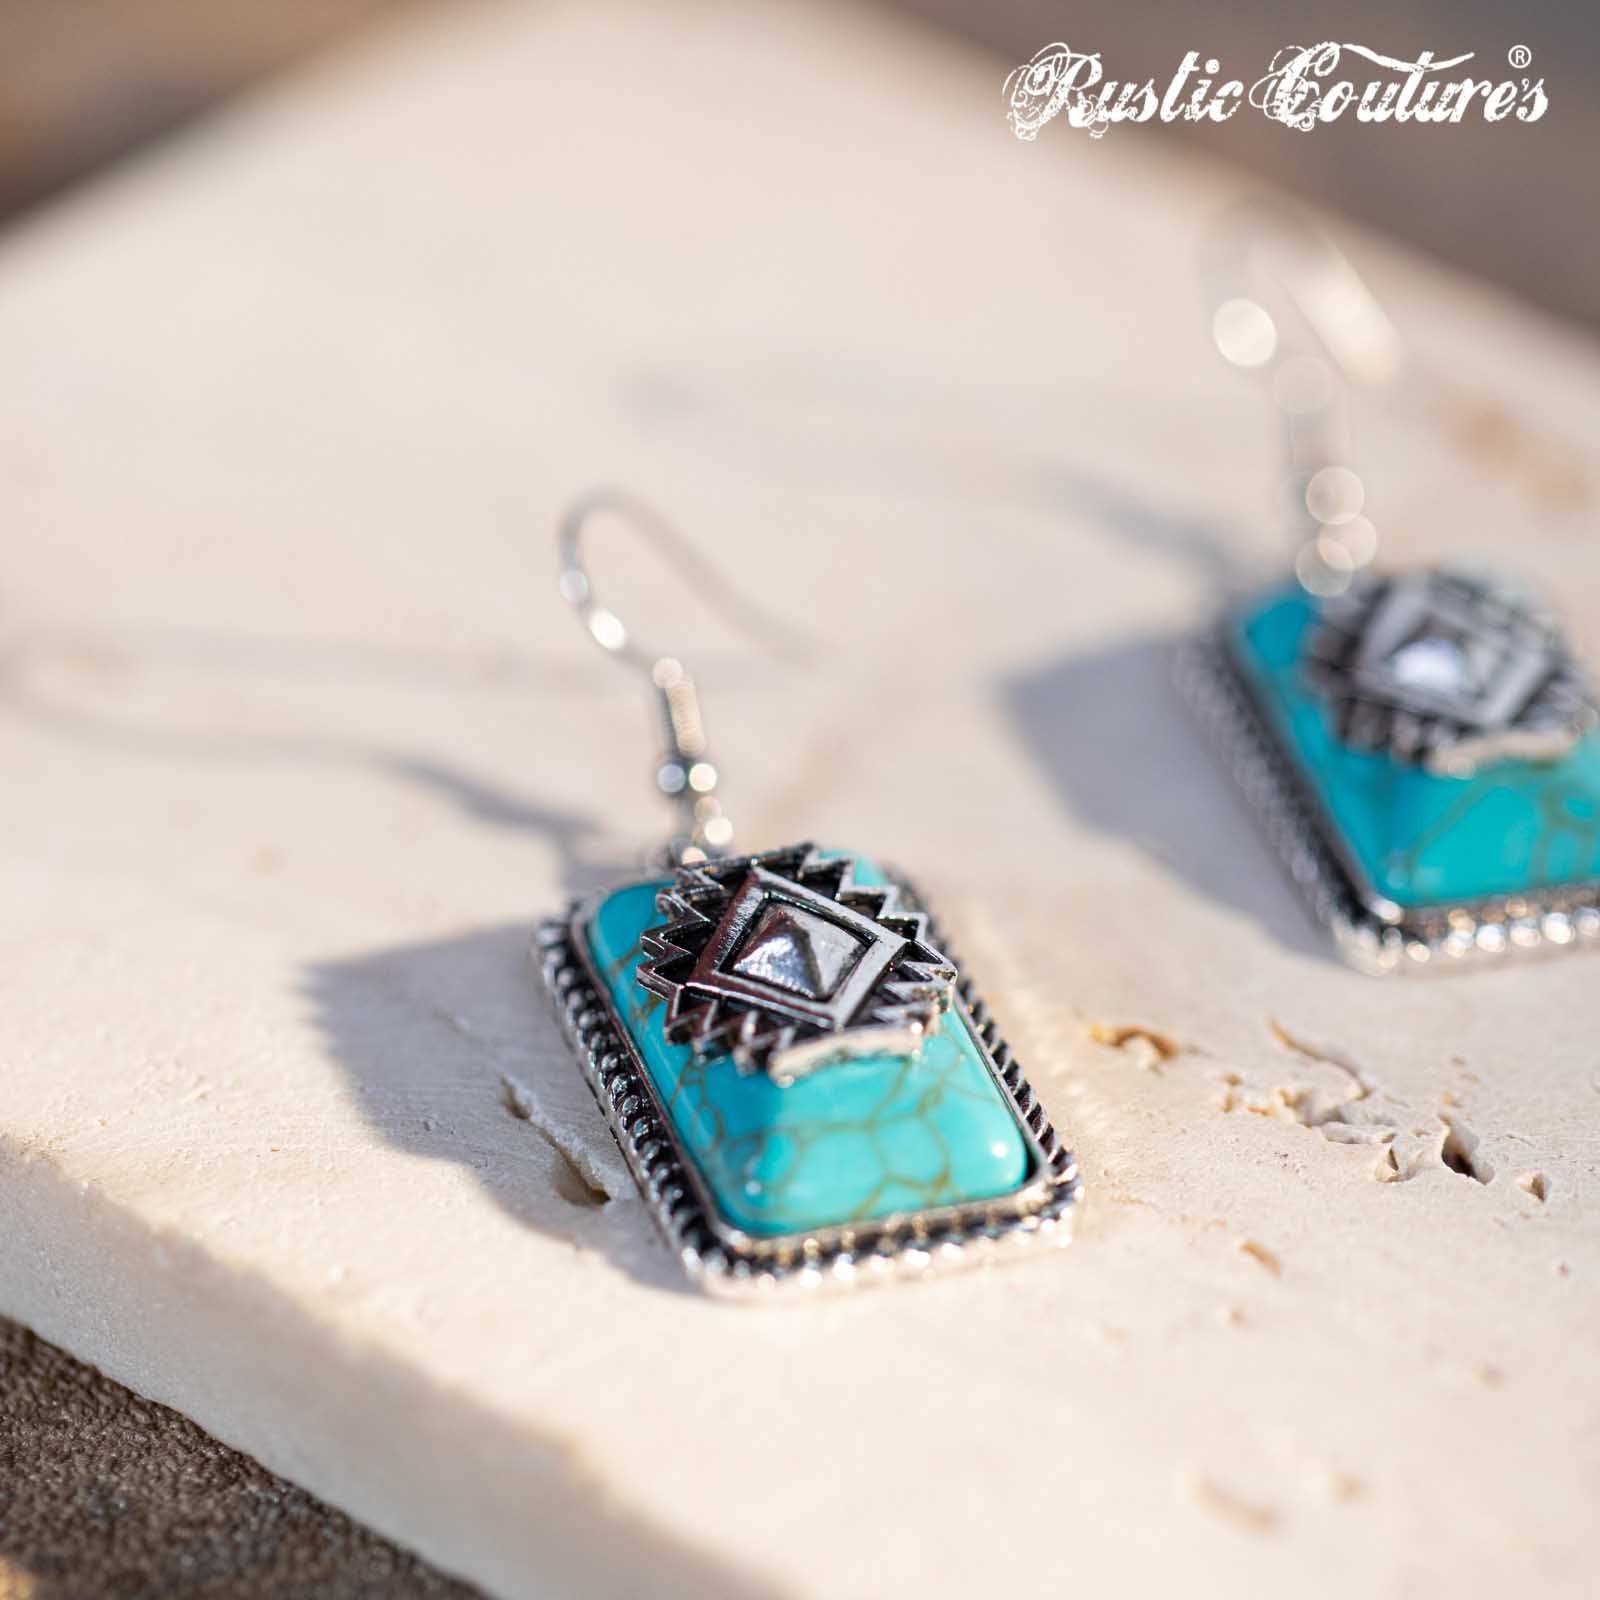 Rustic Couture's Bohemian Rectangular Block Synthetic Turquoise Earring